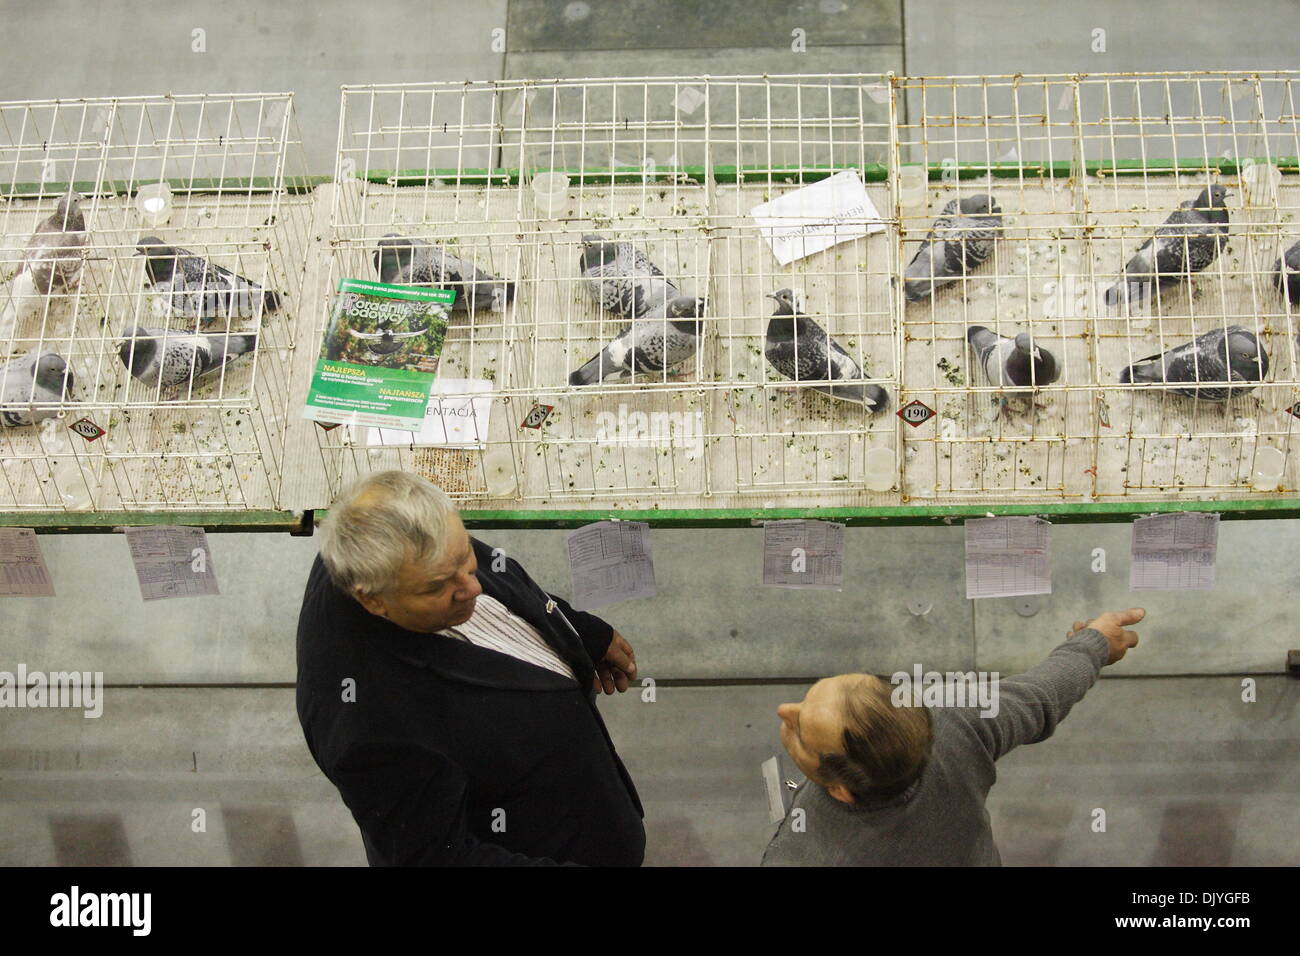 Gdansk, Poland. 1st Dec 2013. 8th International Fair of Pigeon Post and Acessories at Amber Expo hall in Gdansk. Exhibitors show carrier pigeons and take part in auction of pigeons from the Polish, Dutch, German and Belgian pigeons reputable kennels. Credit:  Michal Fludra/Alamy Live News Stock Photo